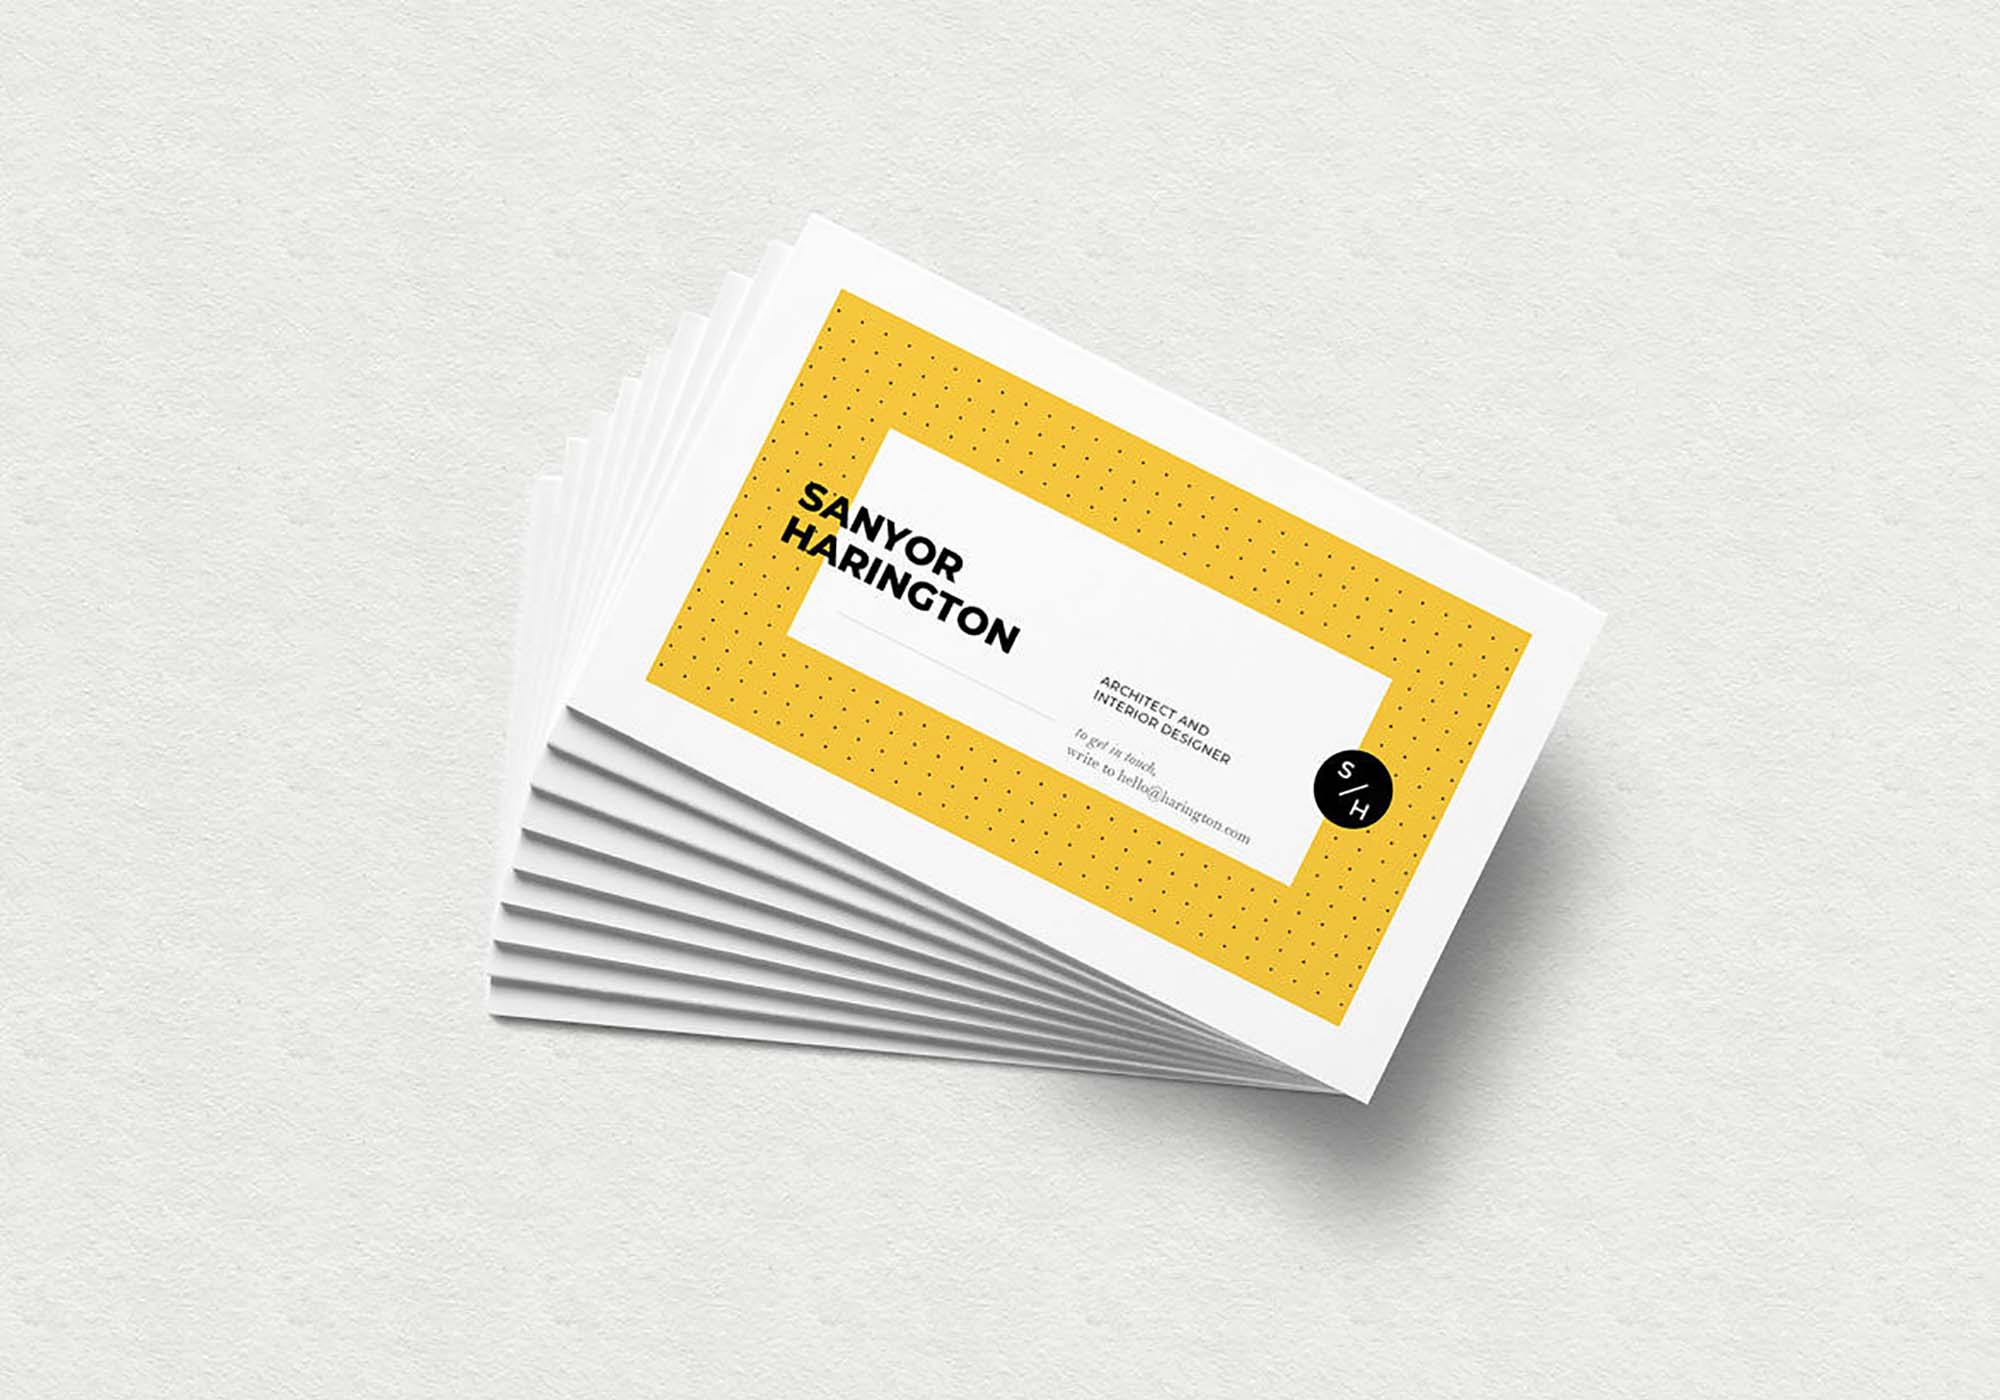 Realistic Stacked Business Card Mockup